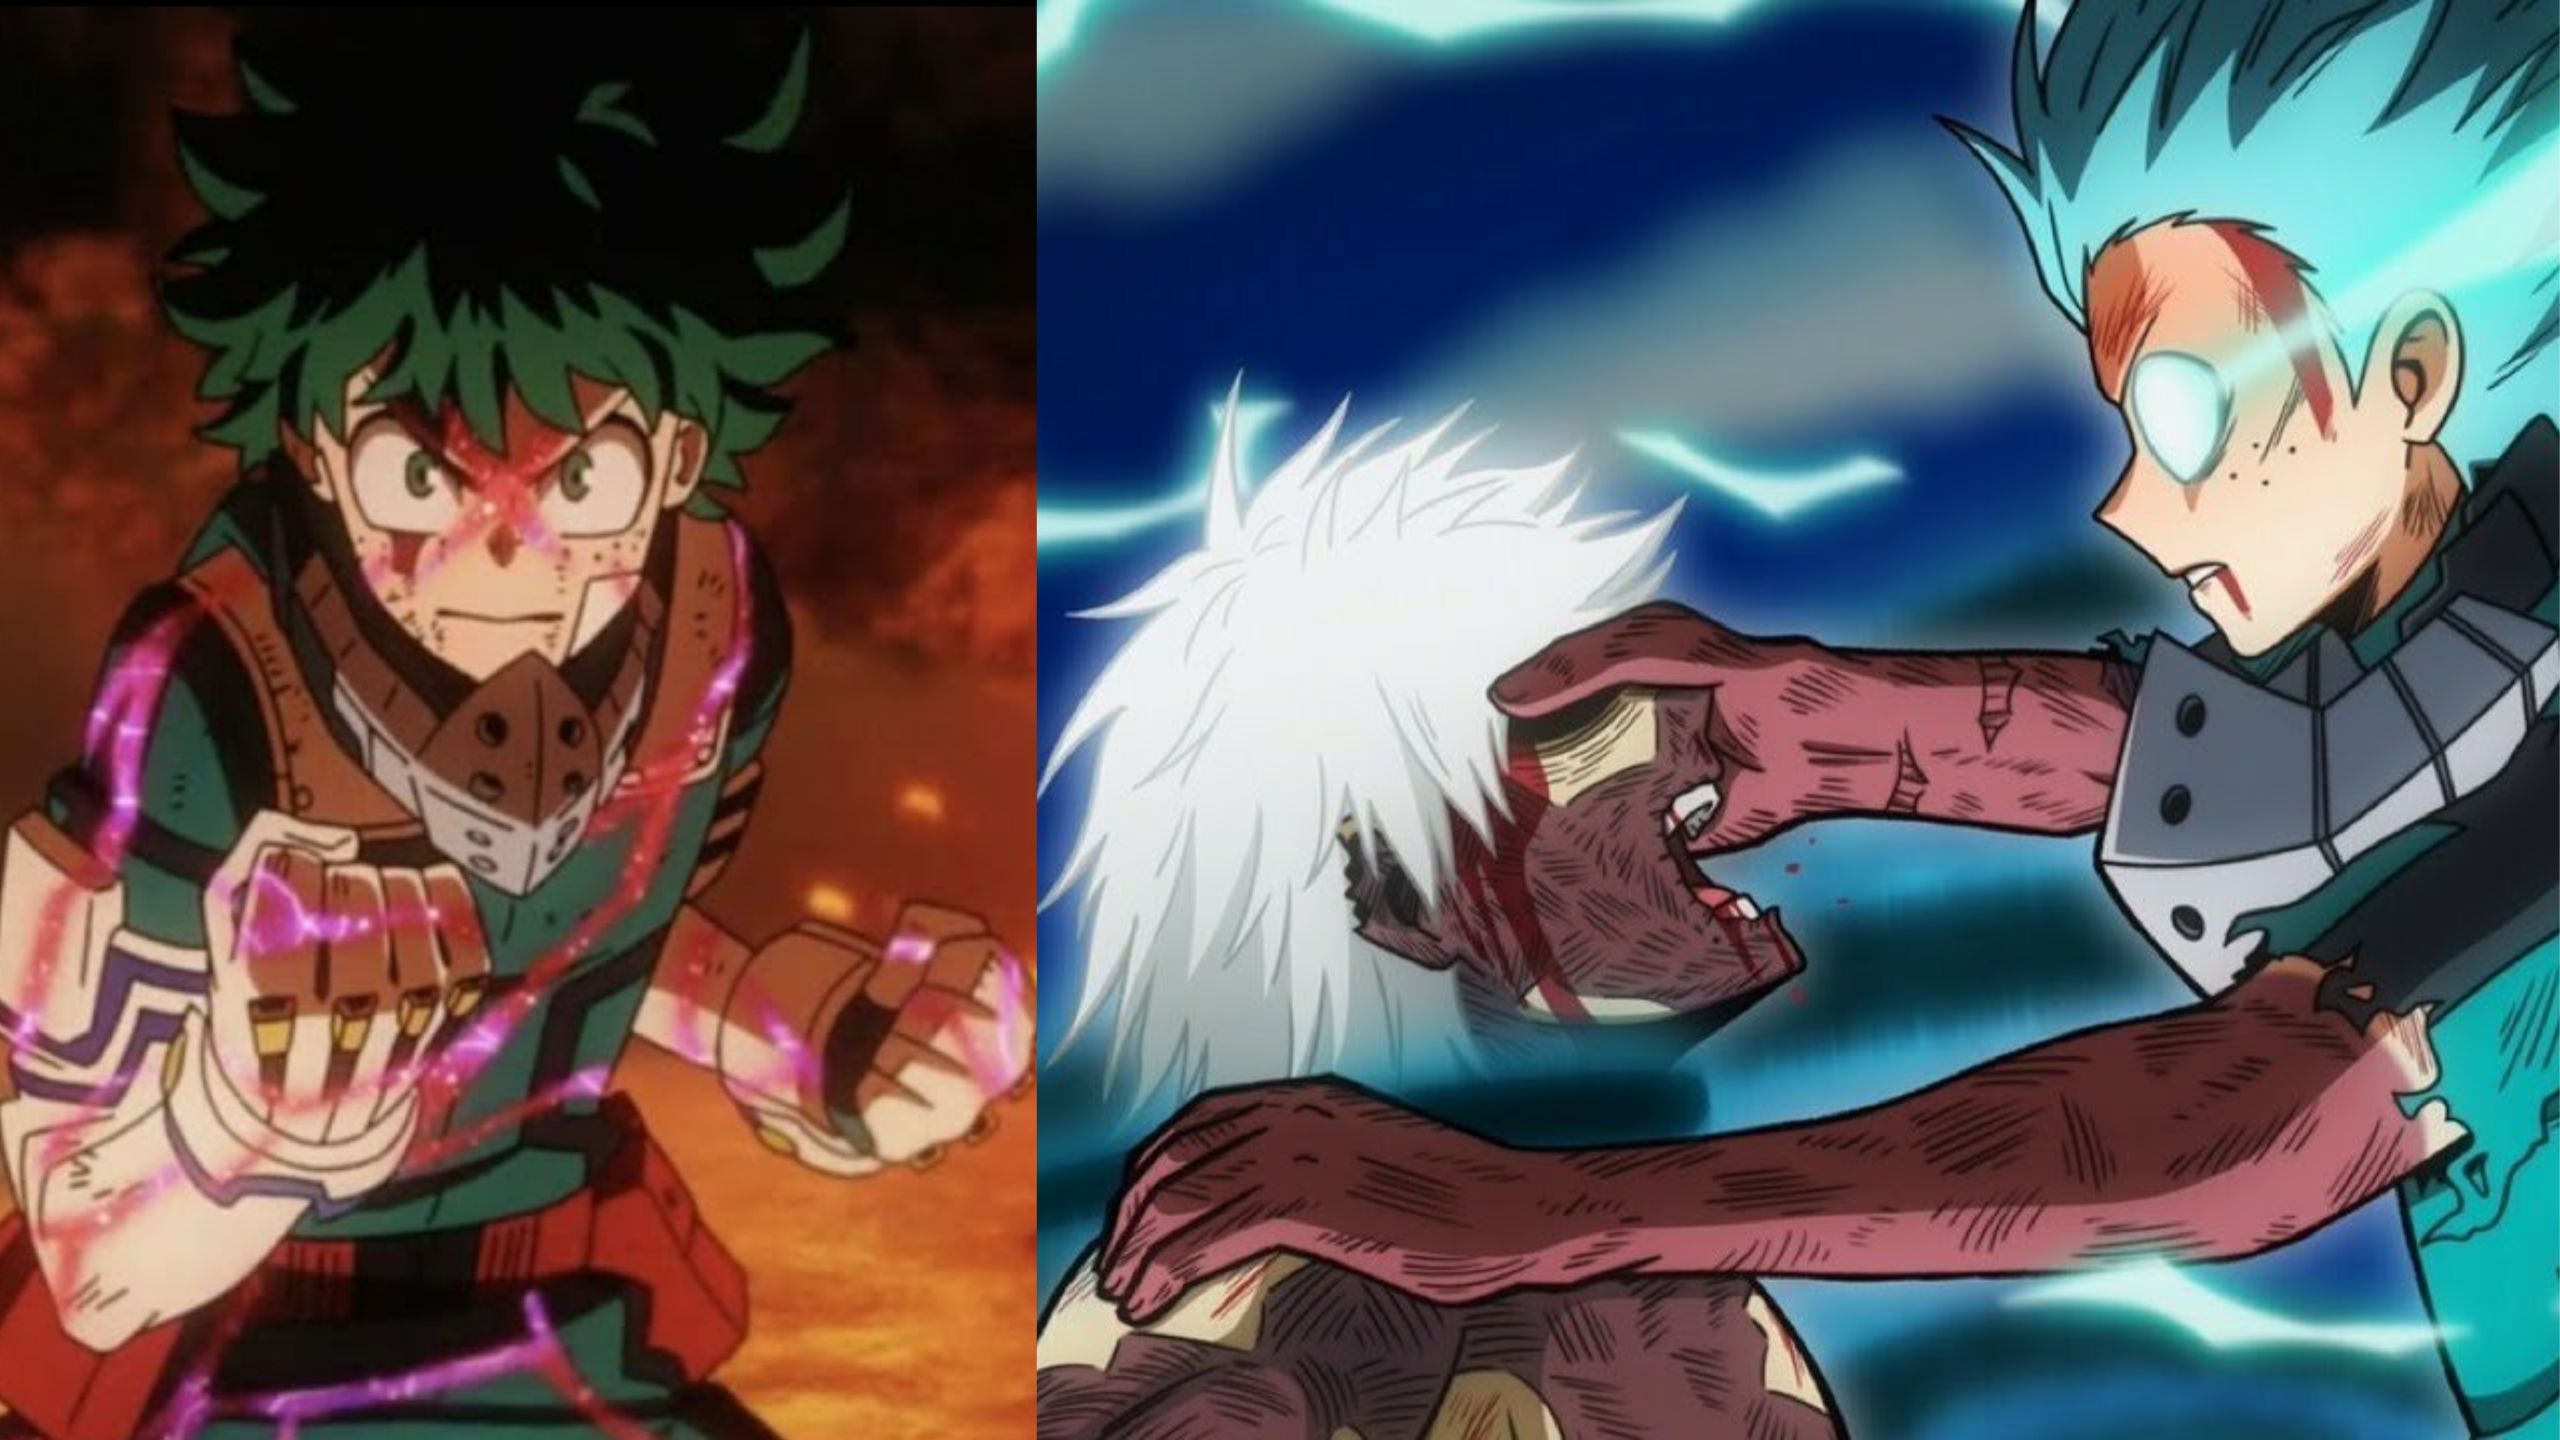 Deku's Final Act: How My Hero Academia's End Will Transform Society and Challenge Justice